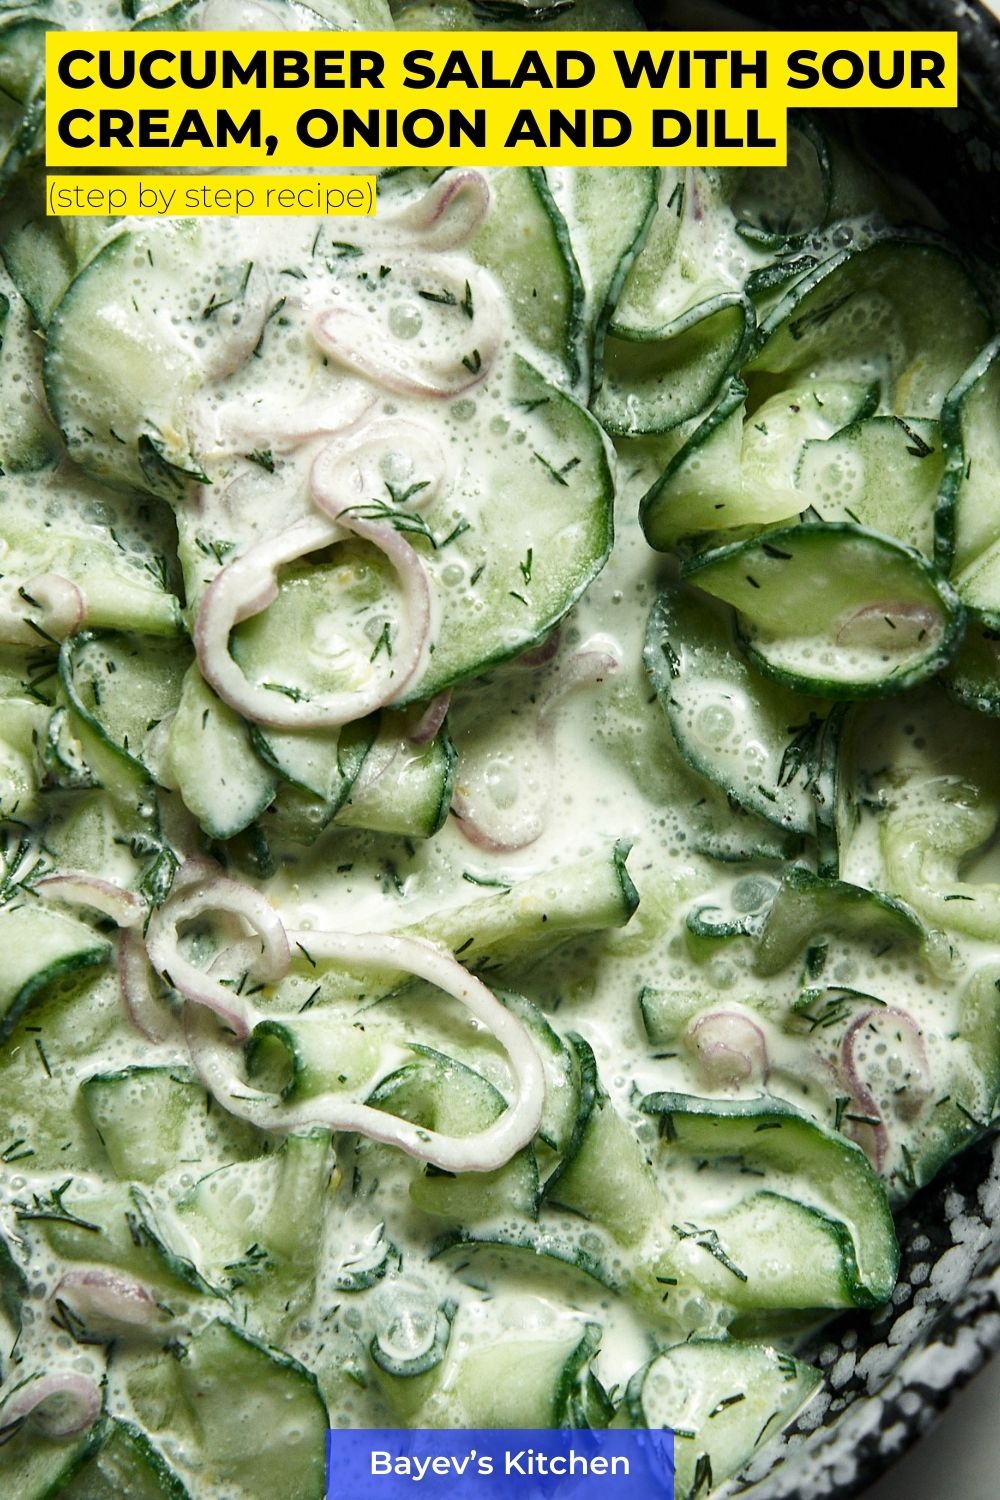 Cucumber salad with sour cream, onion and dill by bayevskitchen.com